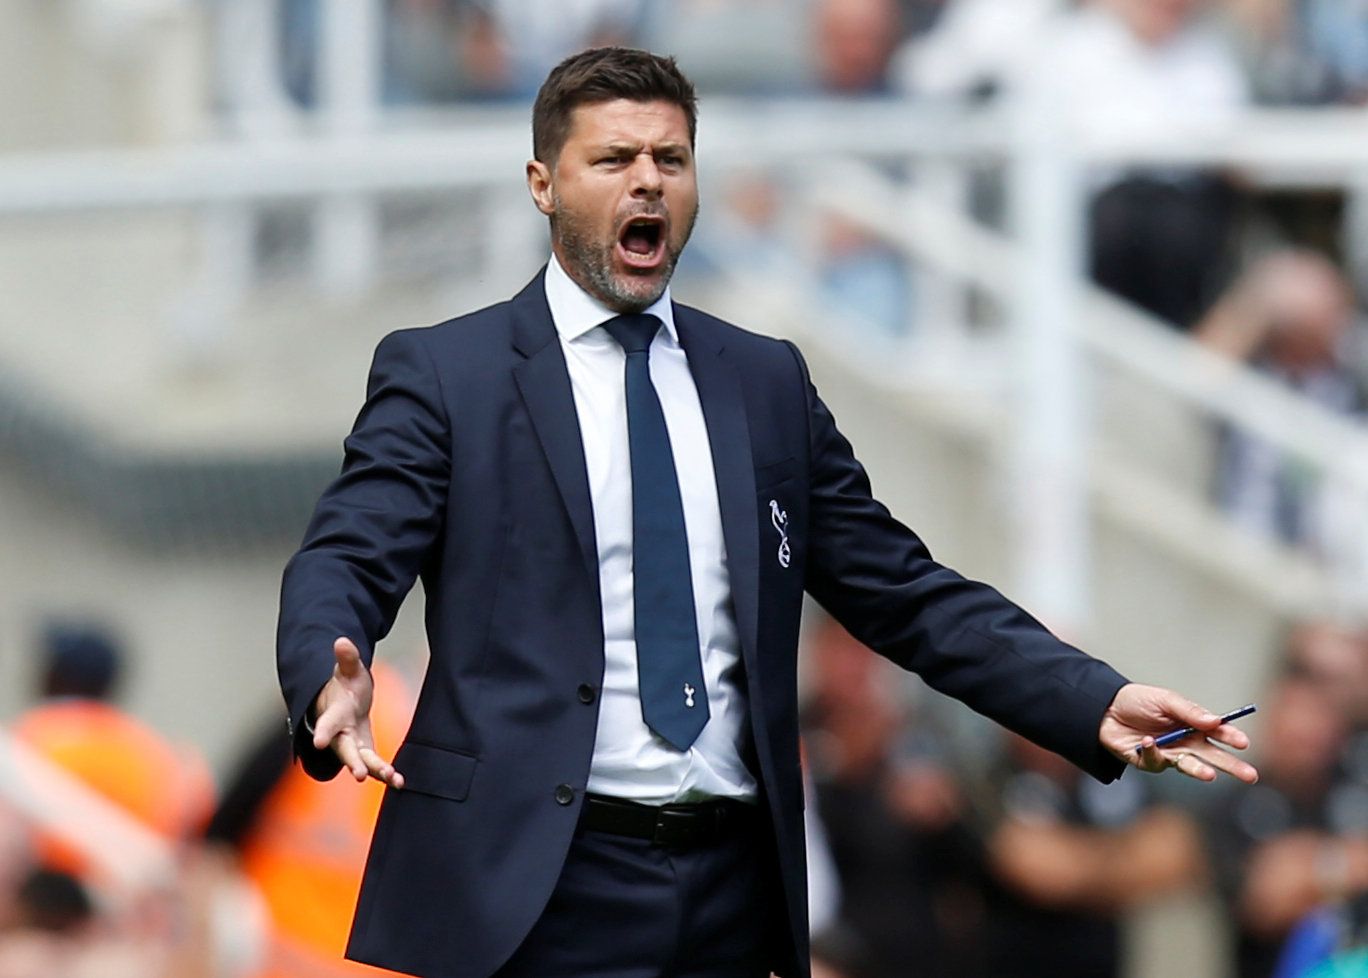 Soccer Football - Premier League - Newcastle United v Tottenham Hotspur - St James' Park, Newcastle, Britain - August 11, 2018   Tottenham manager Mauricio Pochettino   Action Images via Reuters/Ed Sykes    EDITORIAL USE ONLY. No use with unauthorized audio, video, data, fixture lists, club/league logos or 